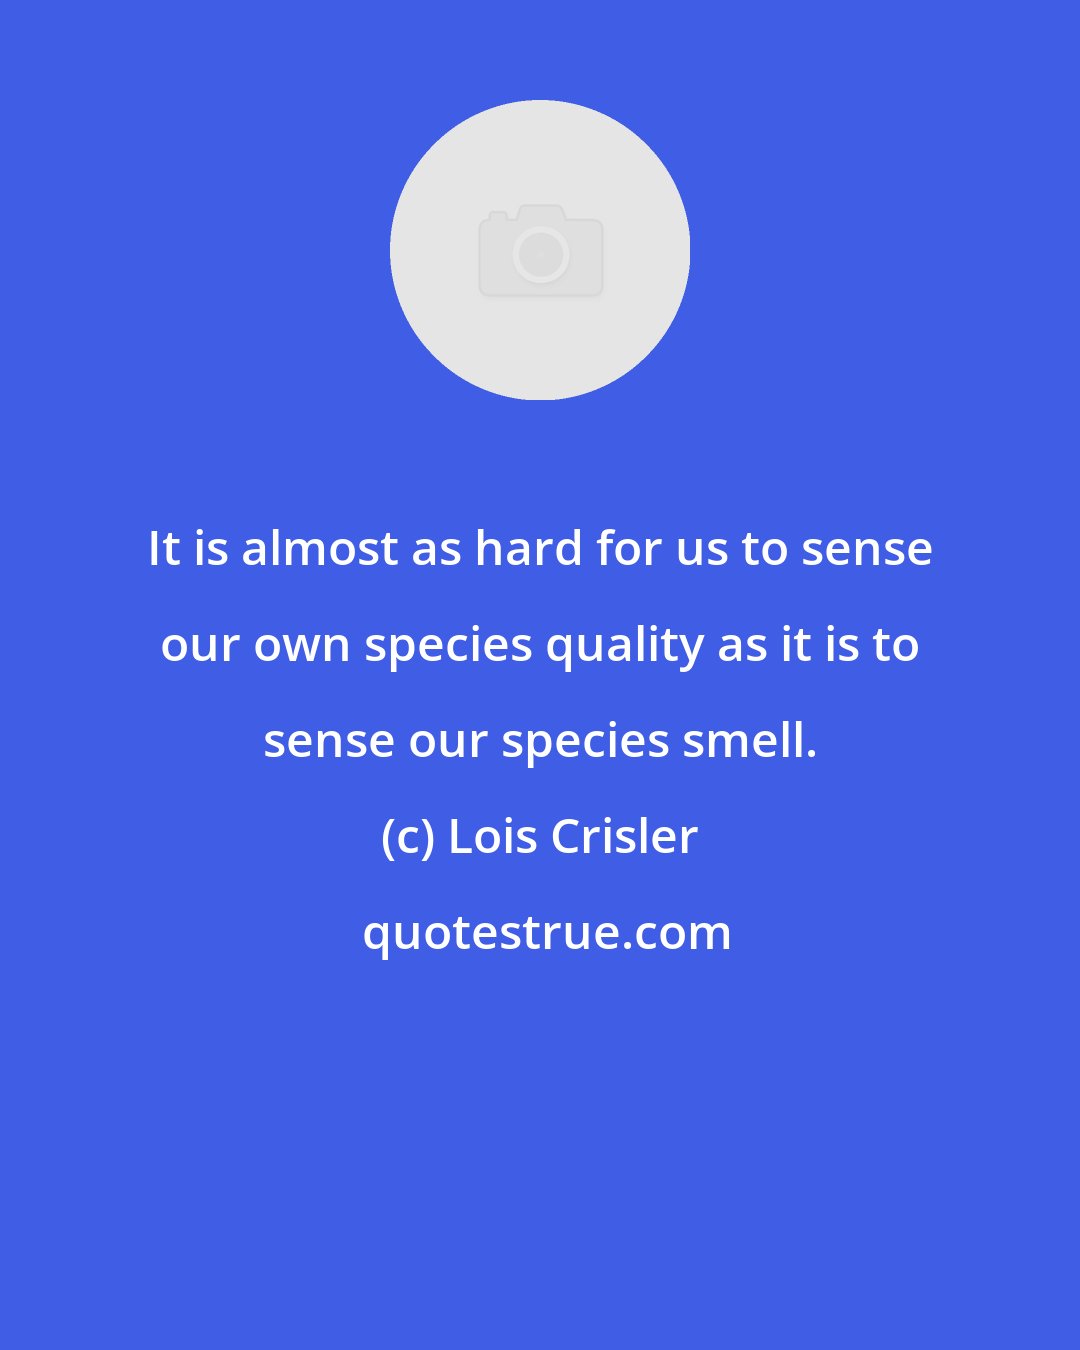 Lois Crisler: It is almost as hard for us to sense our own species quality as it is to sense our species smell.